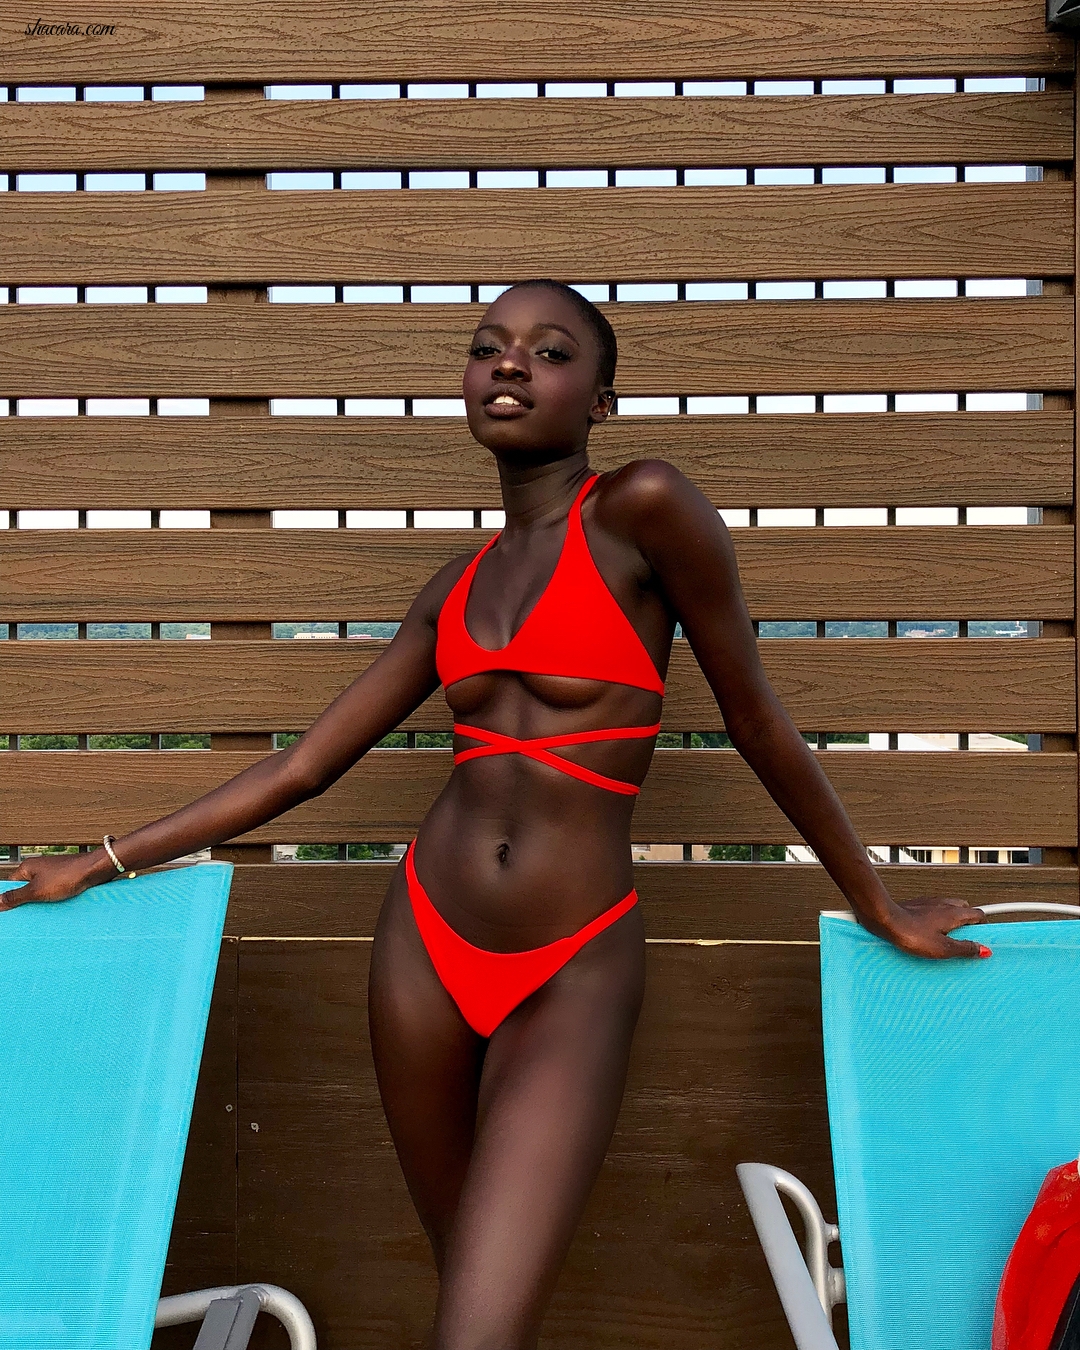 Once You Gaze At Her You Won’t Be Able To Take Your Eyes Off; Meet Senegalese Beauty Soukeyna